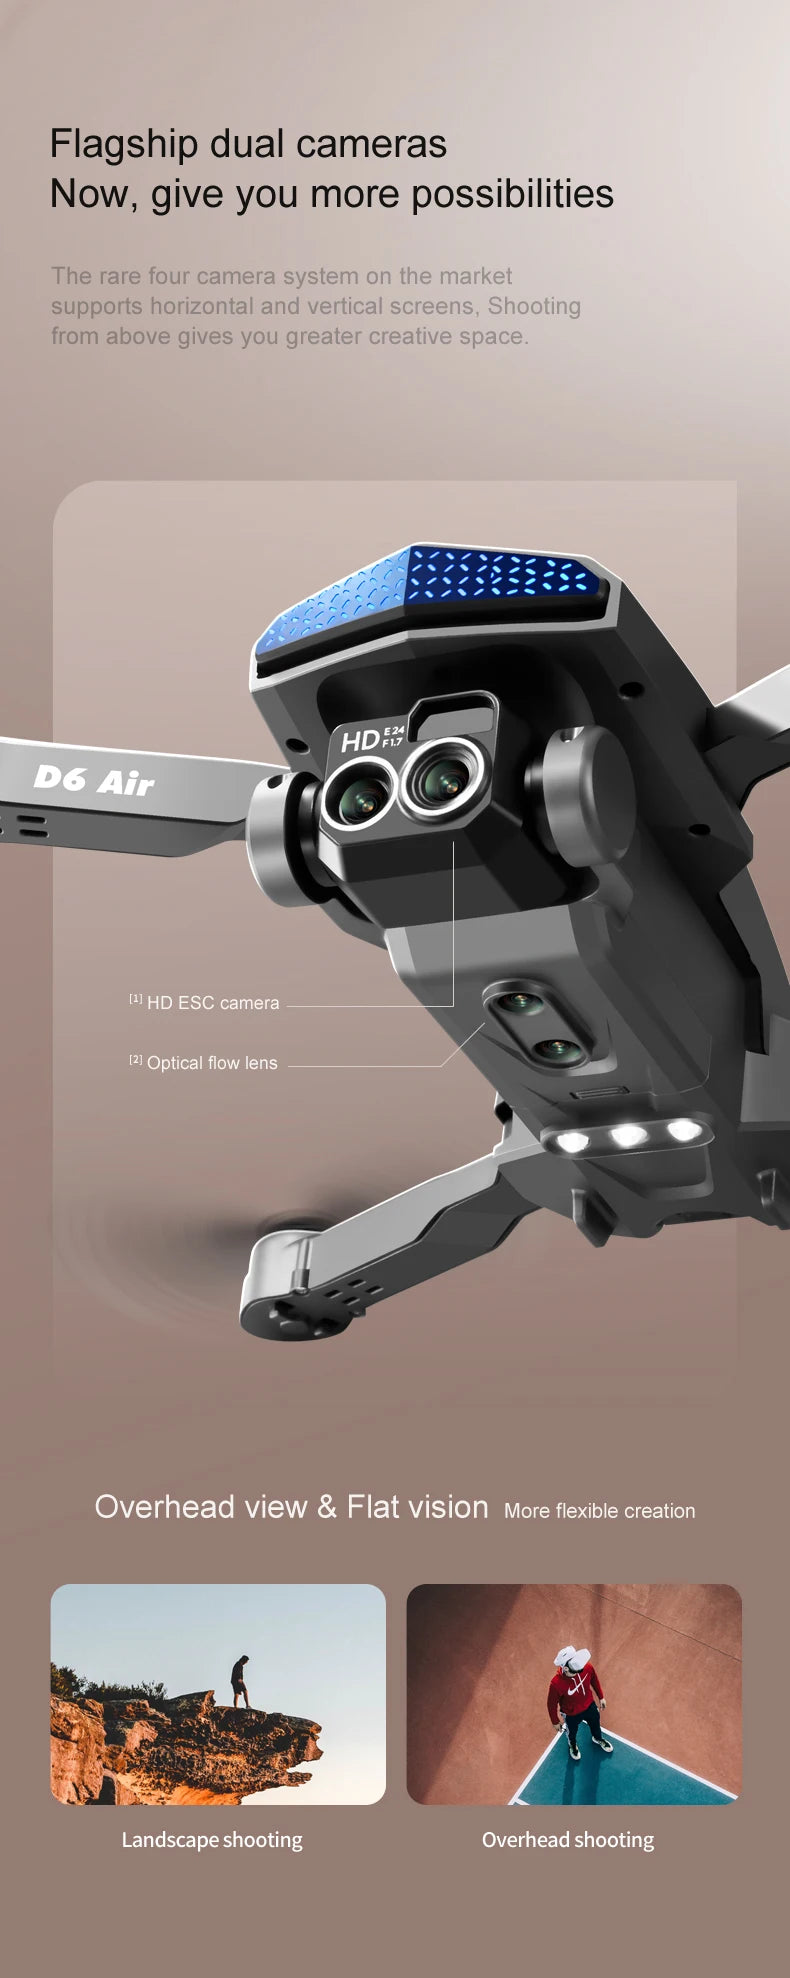 D6 Drone - 8K Professional Dual Camera, d6 drone, flagship dual cameras now, give you more possibilities shooting from above gives you